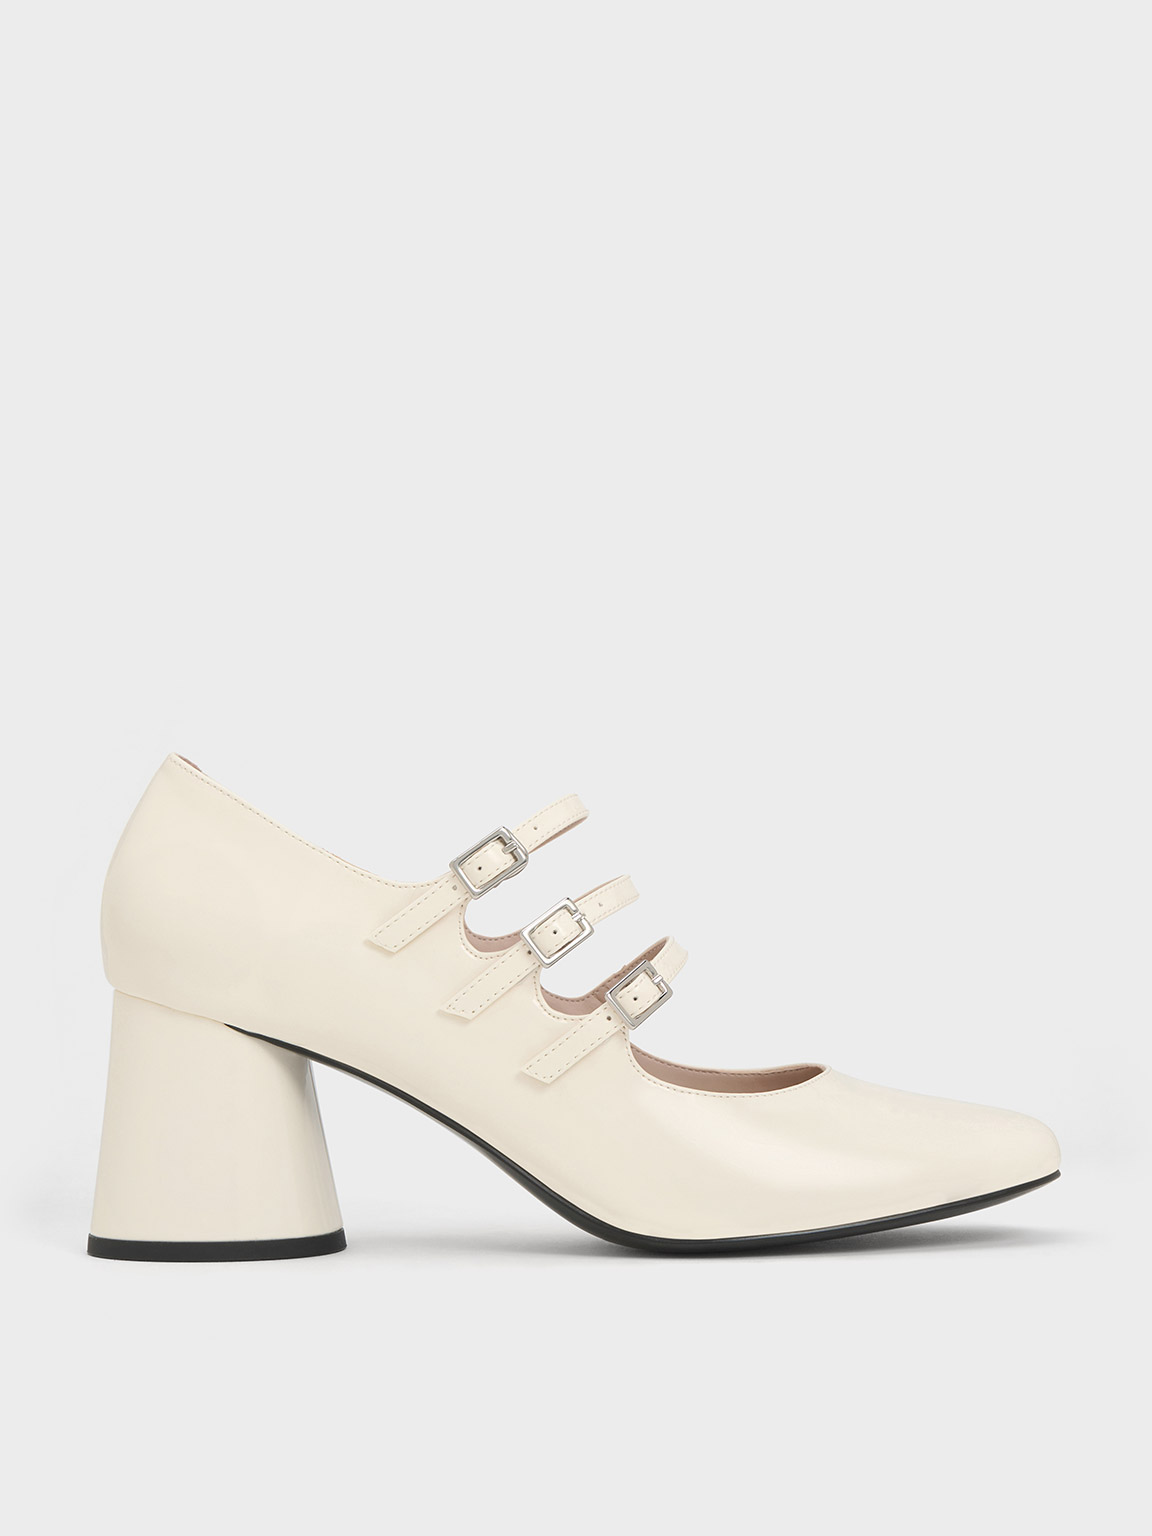 Claudie Patent Buckled Mary Janes